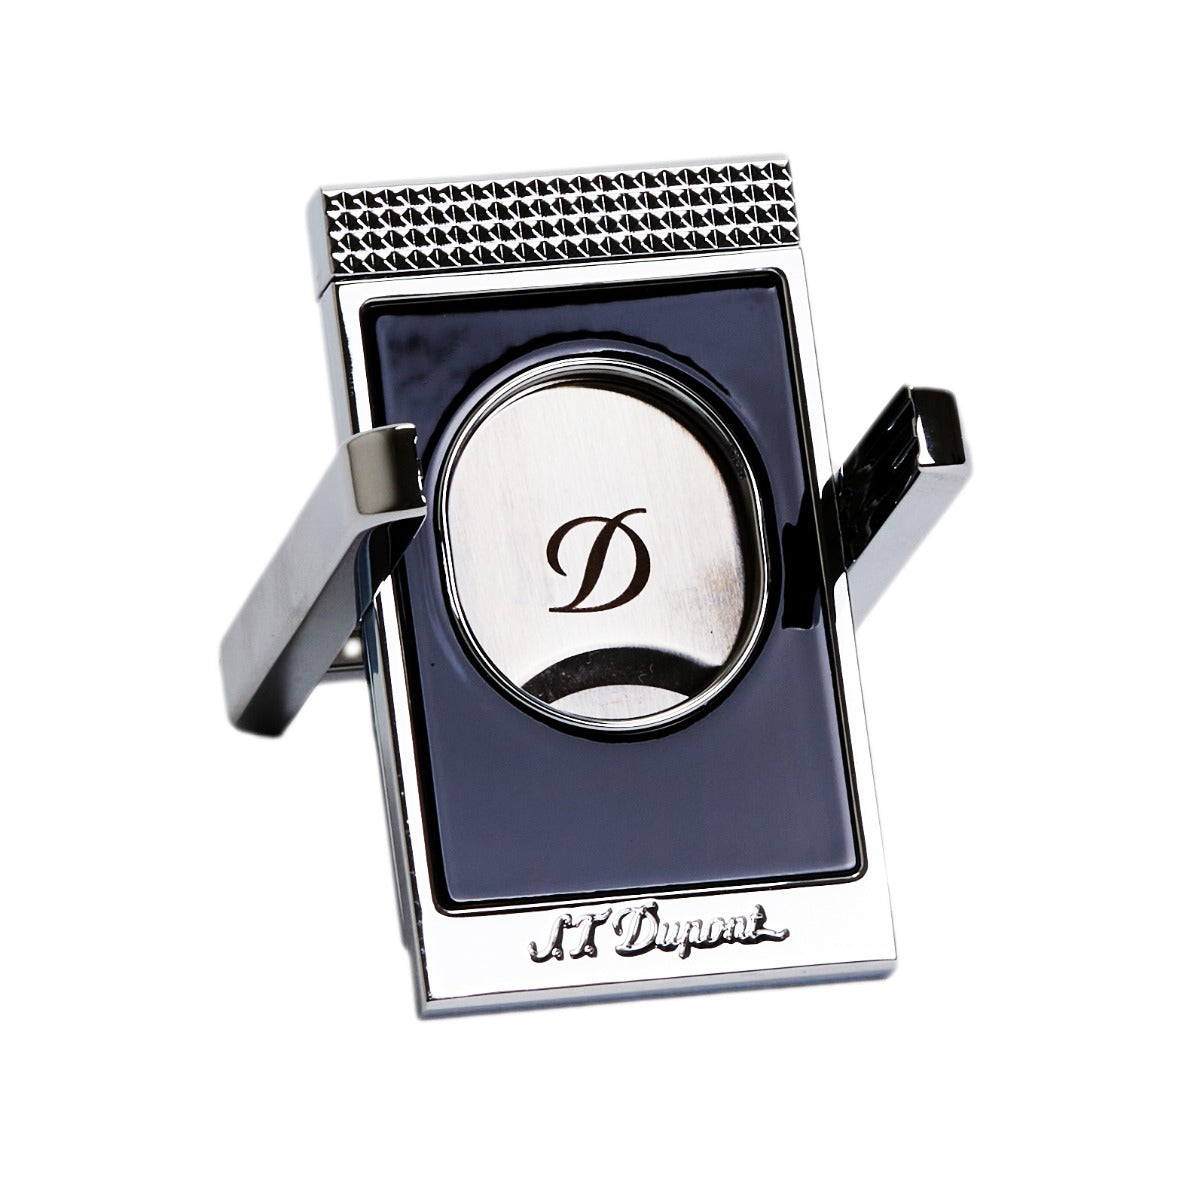 S.T. Dupont Black & Chrome Cigar Cutter Stand